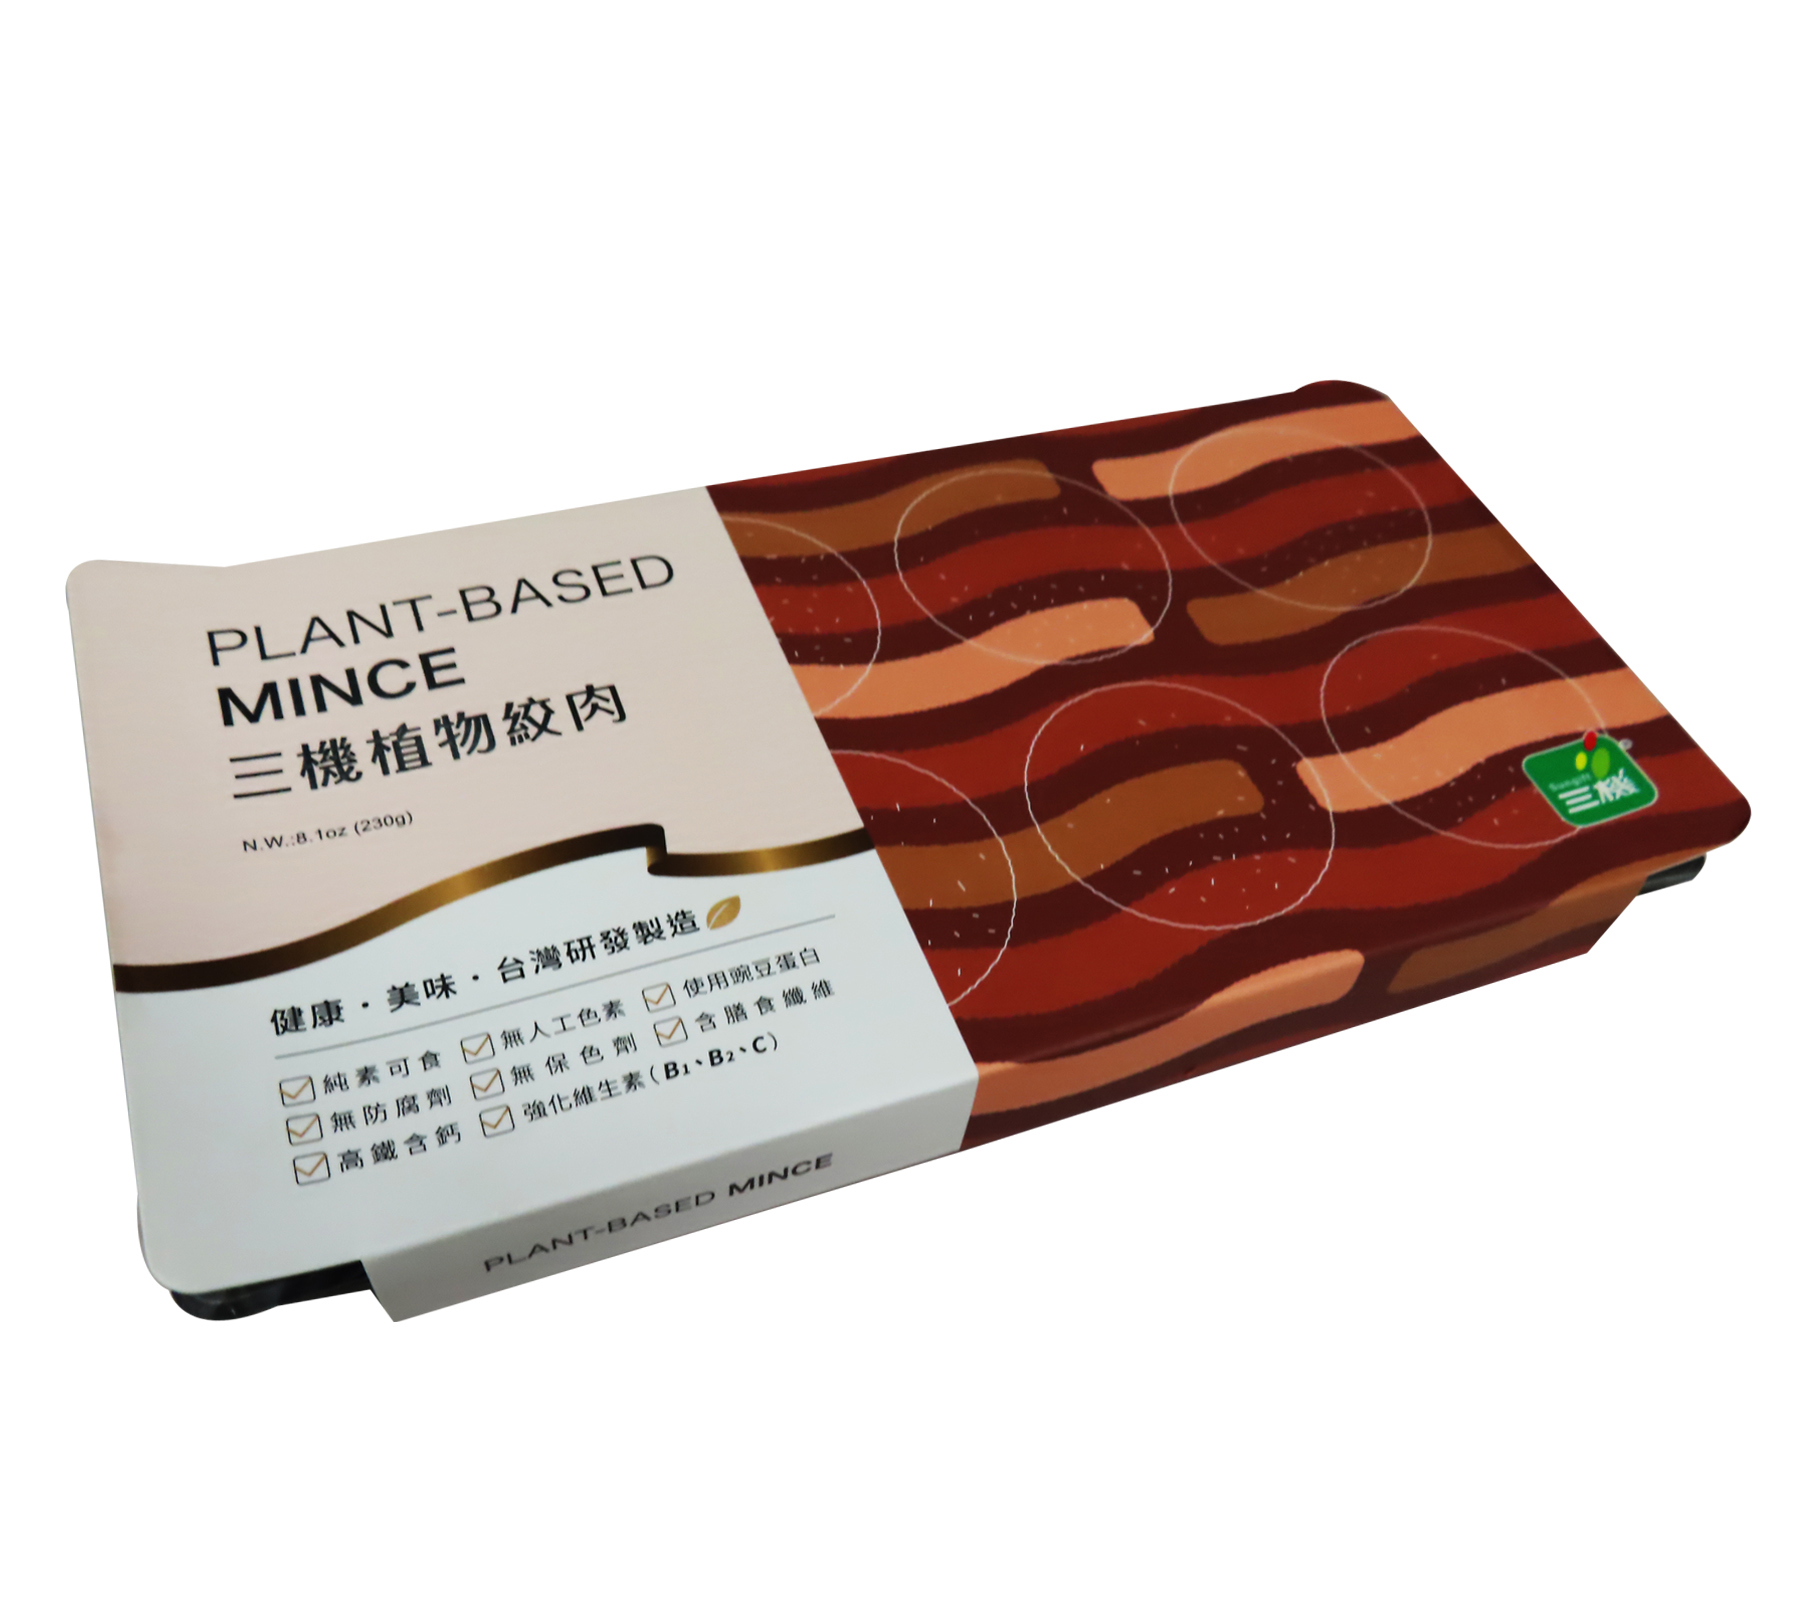 Image Sungift Plant - Based Mince 三机植物绞肉 230grams